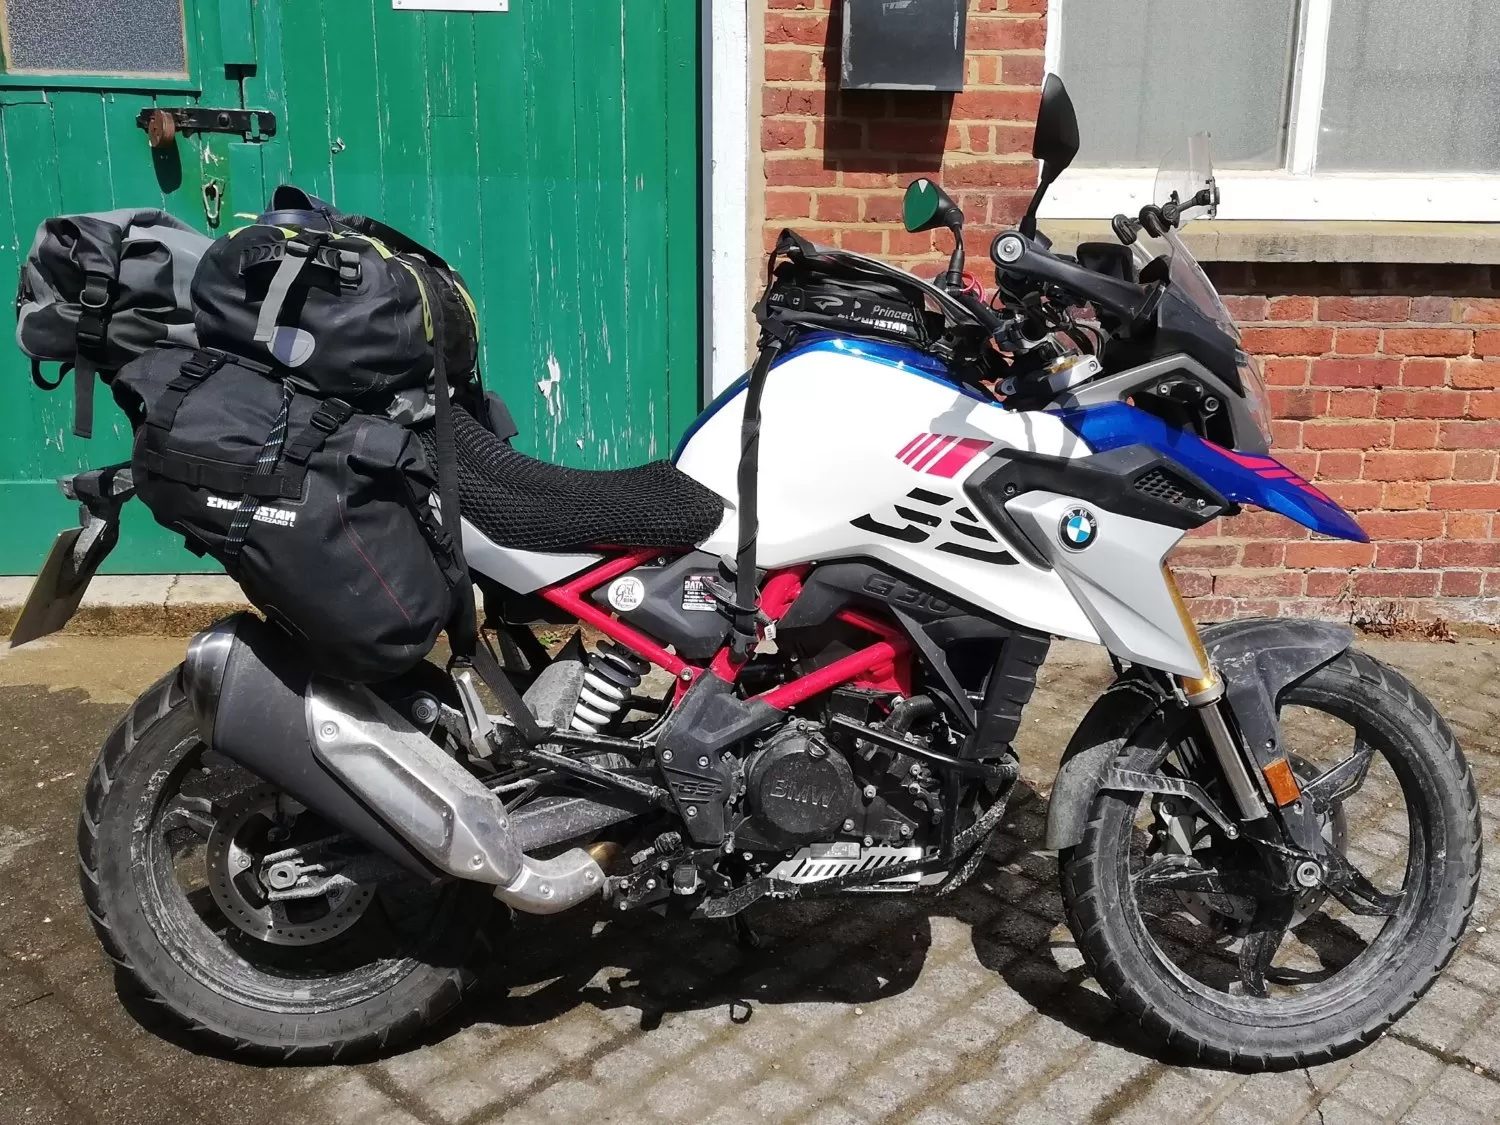 BMW G310GS in the UK